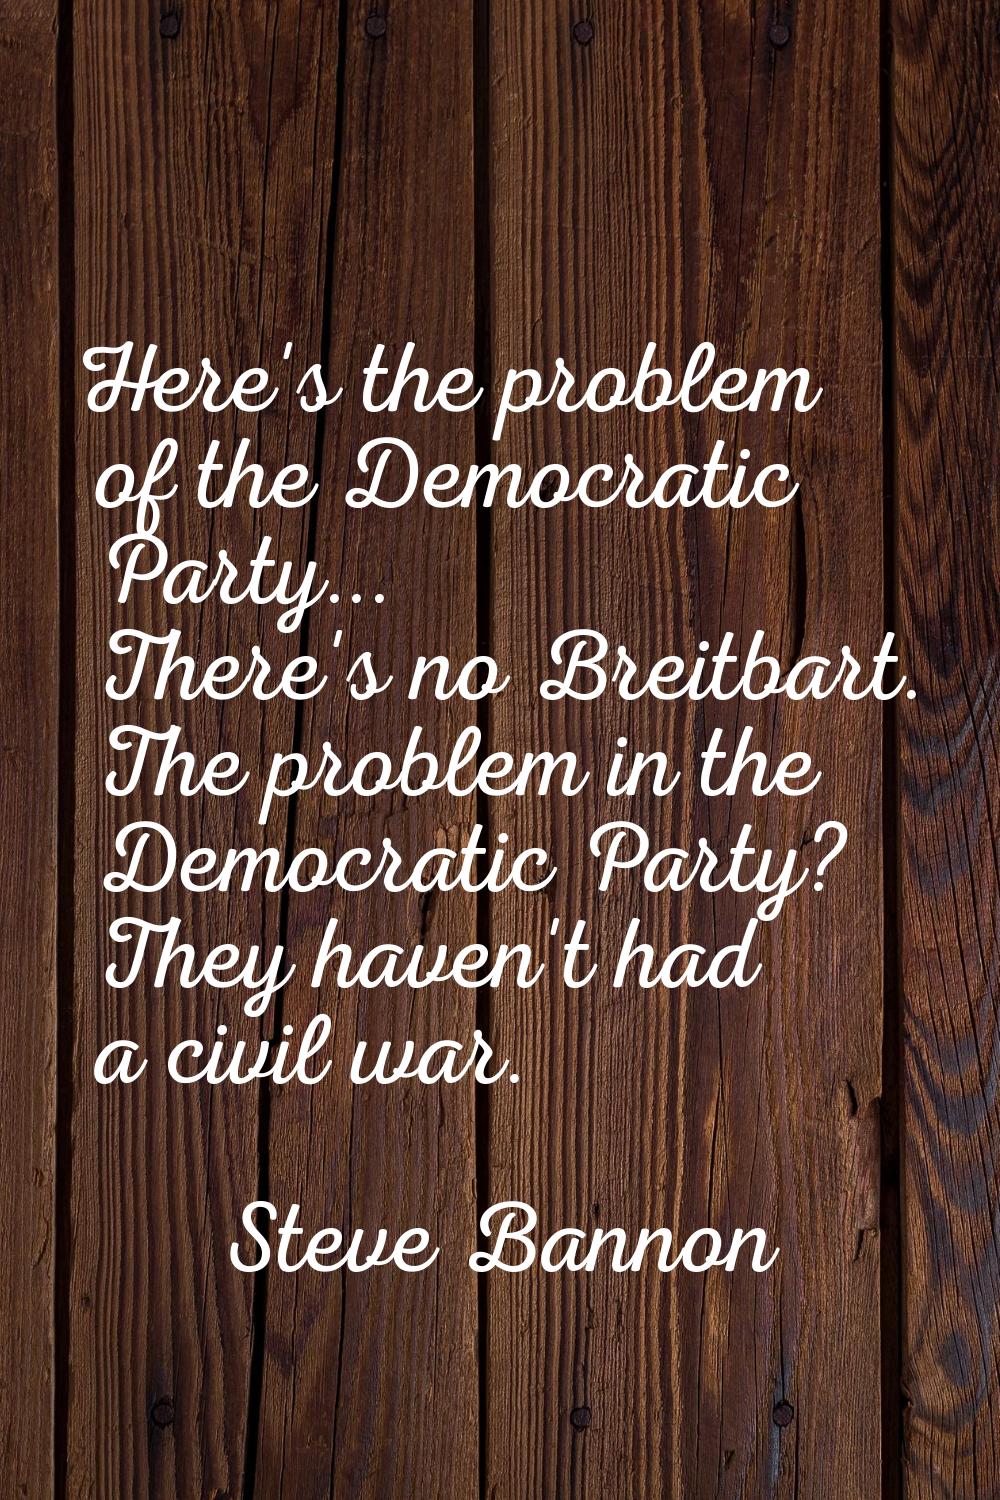 Here's the problem of the Democratic Party... There's no Breitbart. The problem in the Democratic P